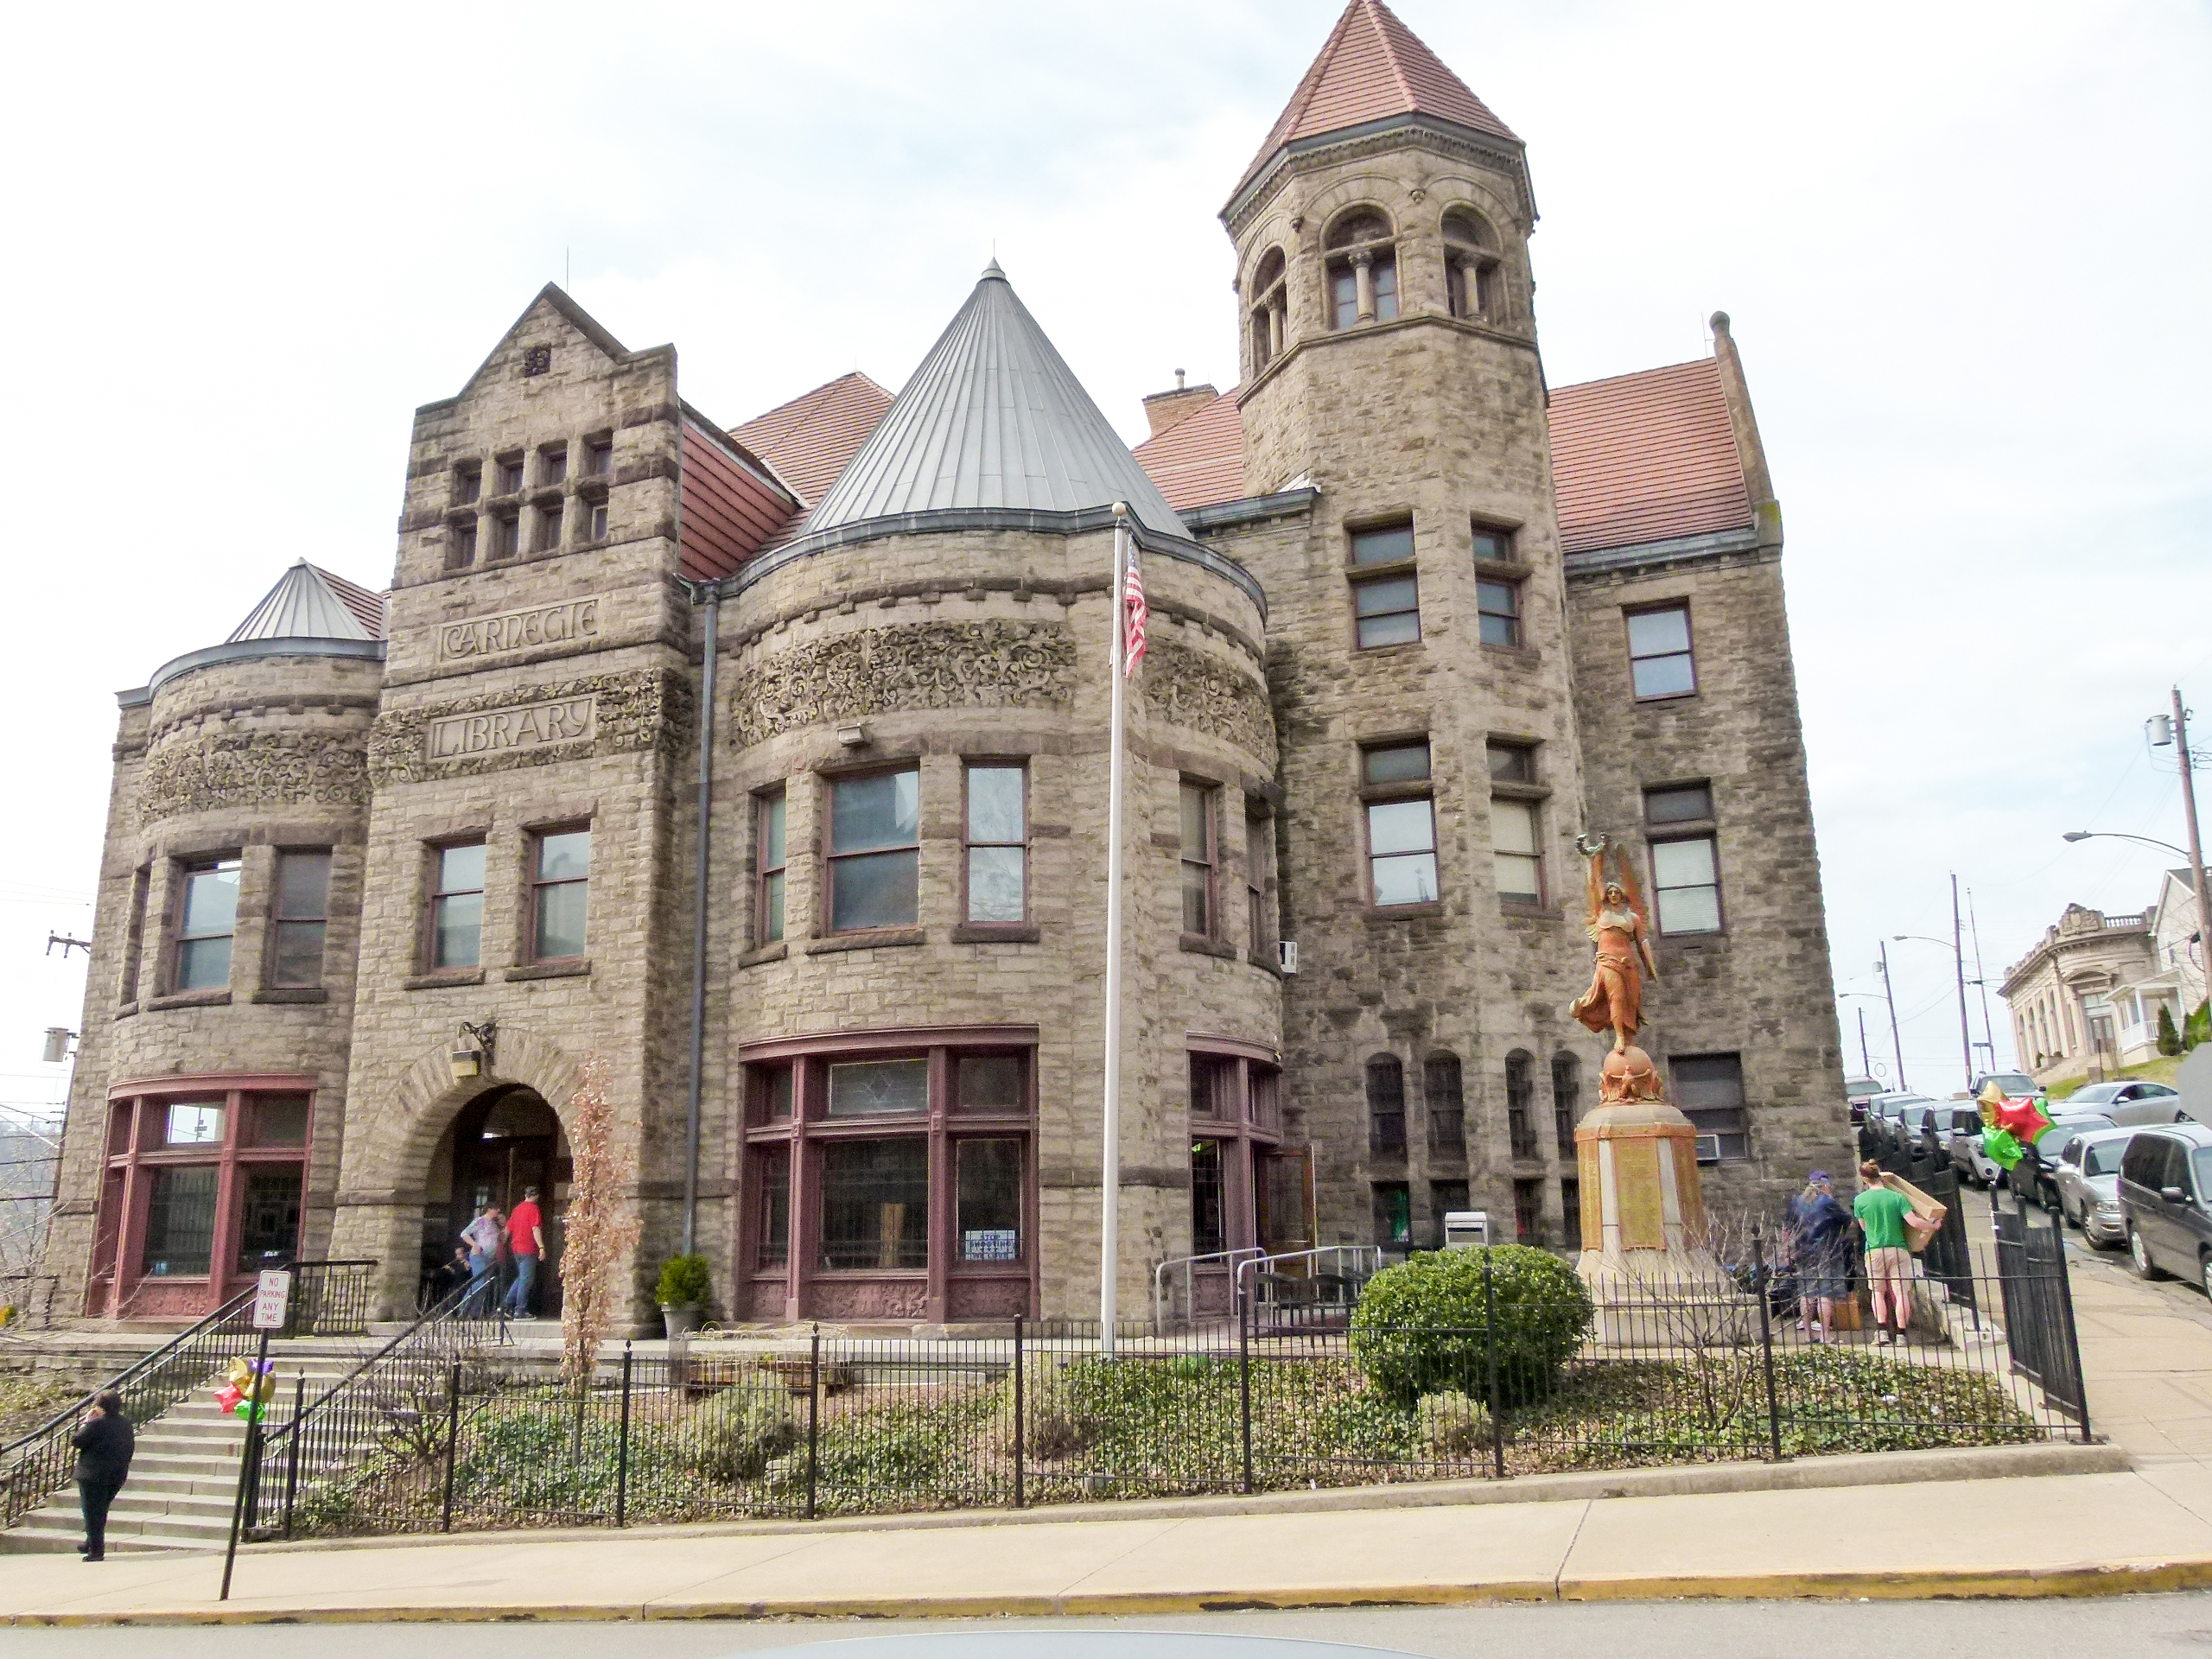 The Braddock Carnegie Library held its 10th Annual Chili Cook-off fundraiser in its beautiful and historic building.